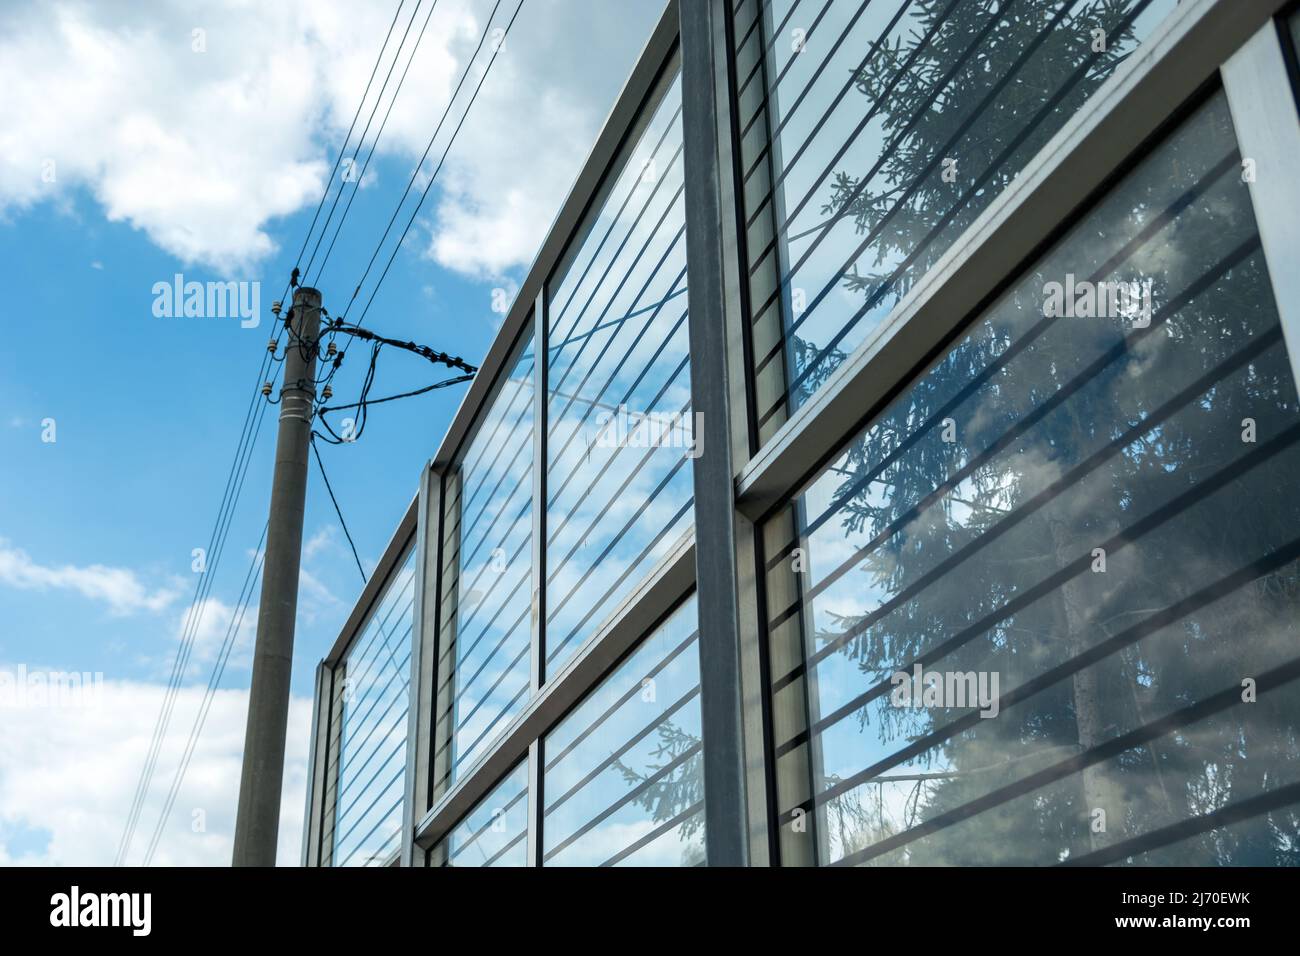 Electric pole standing by glass noise barriers Stock Photo